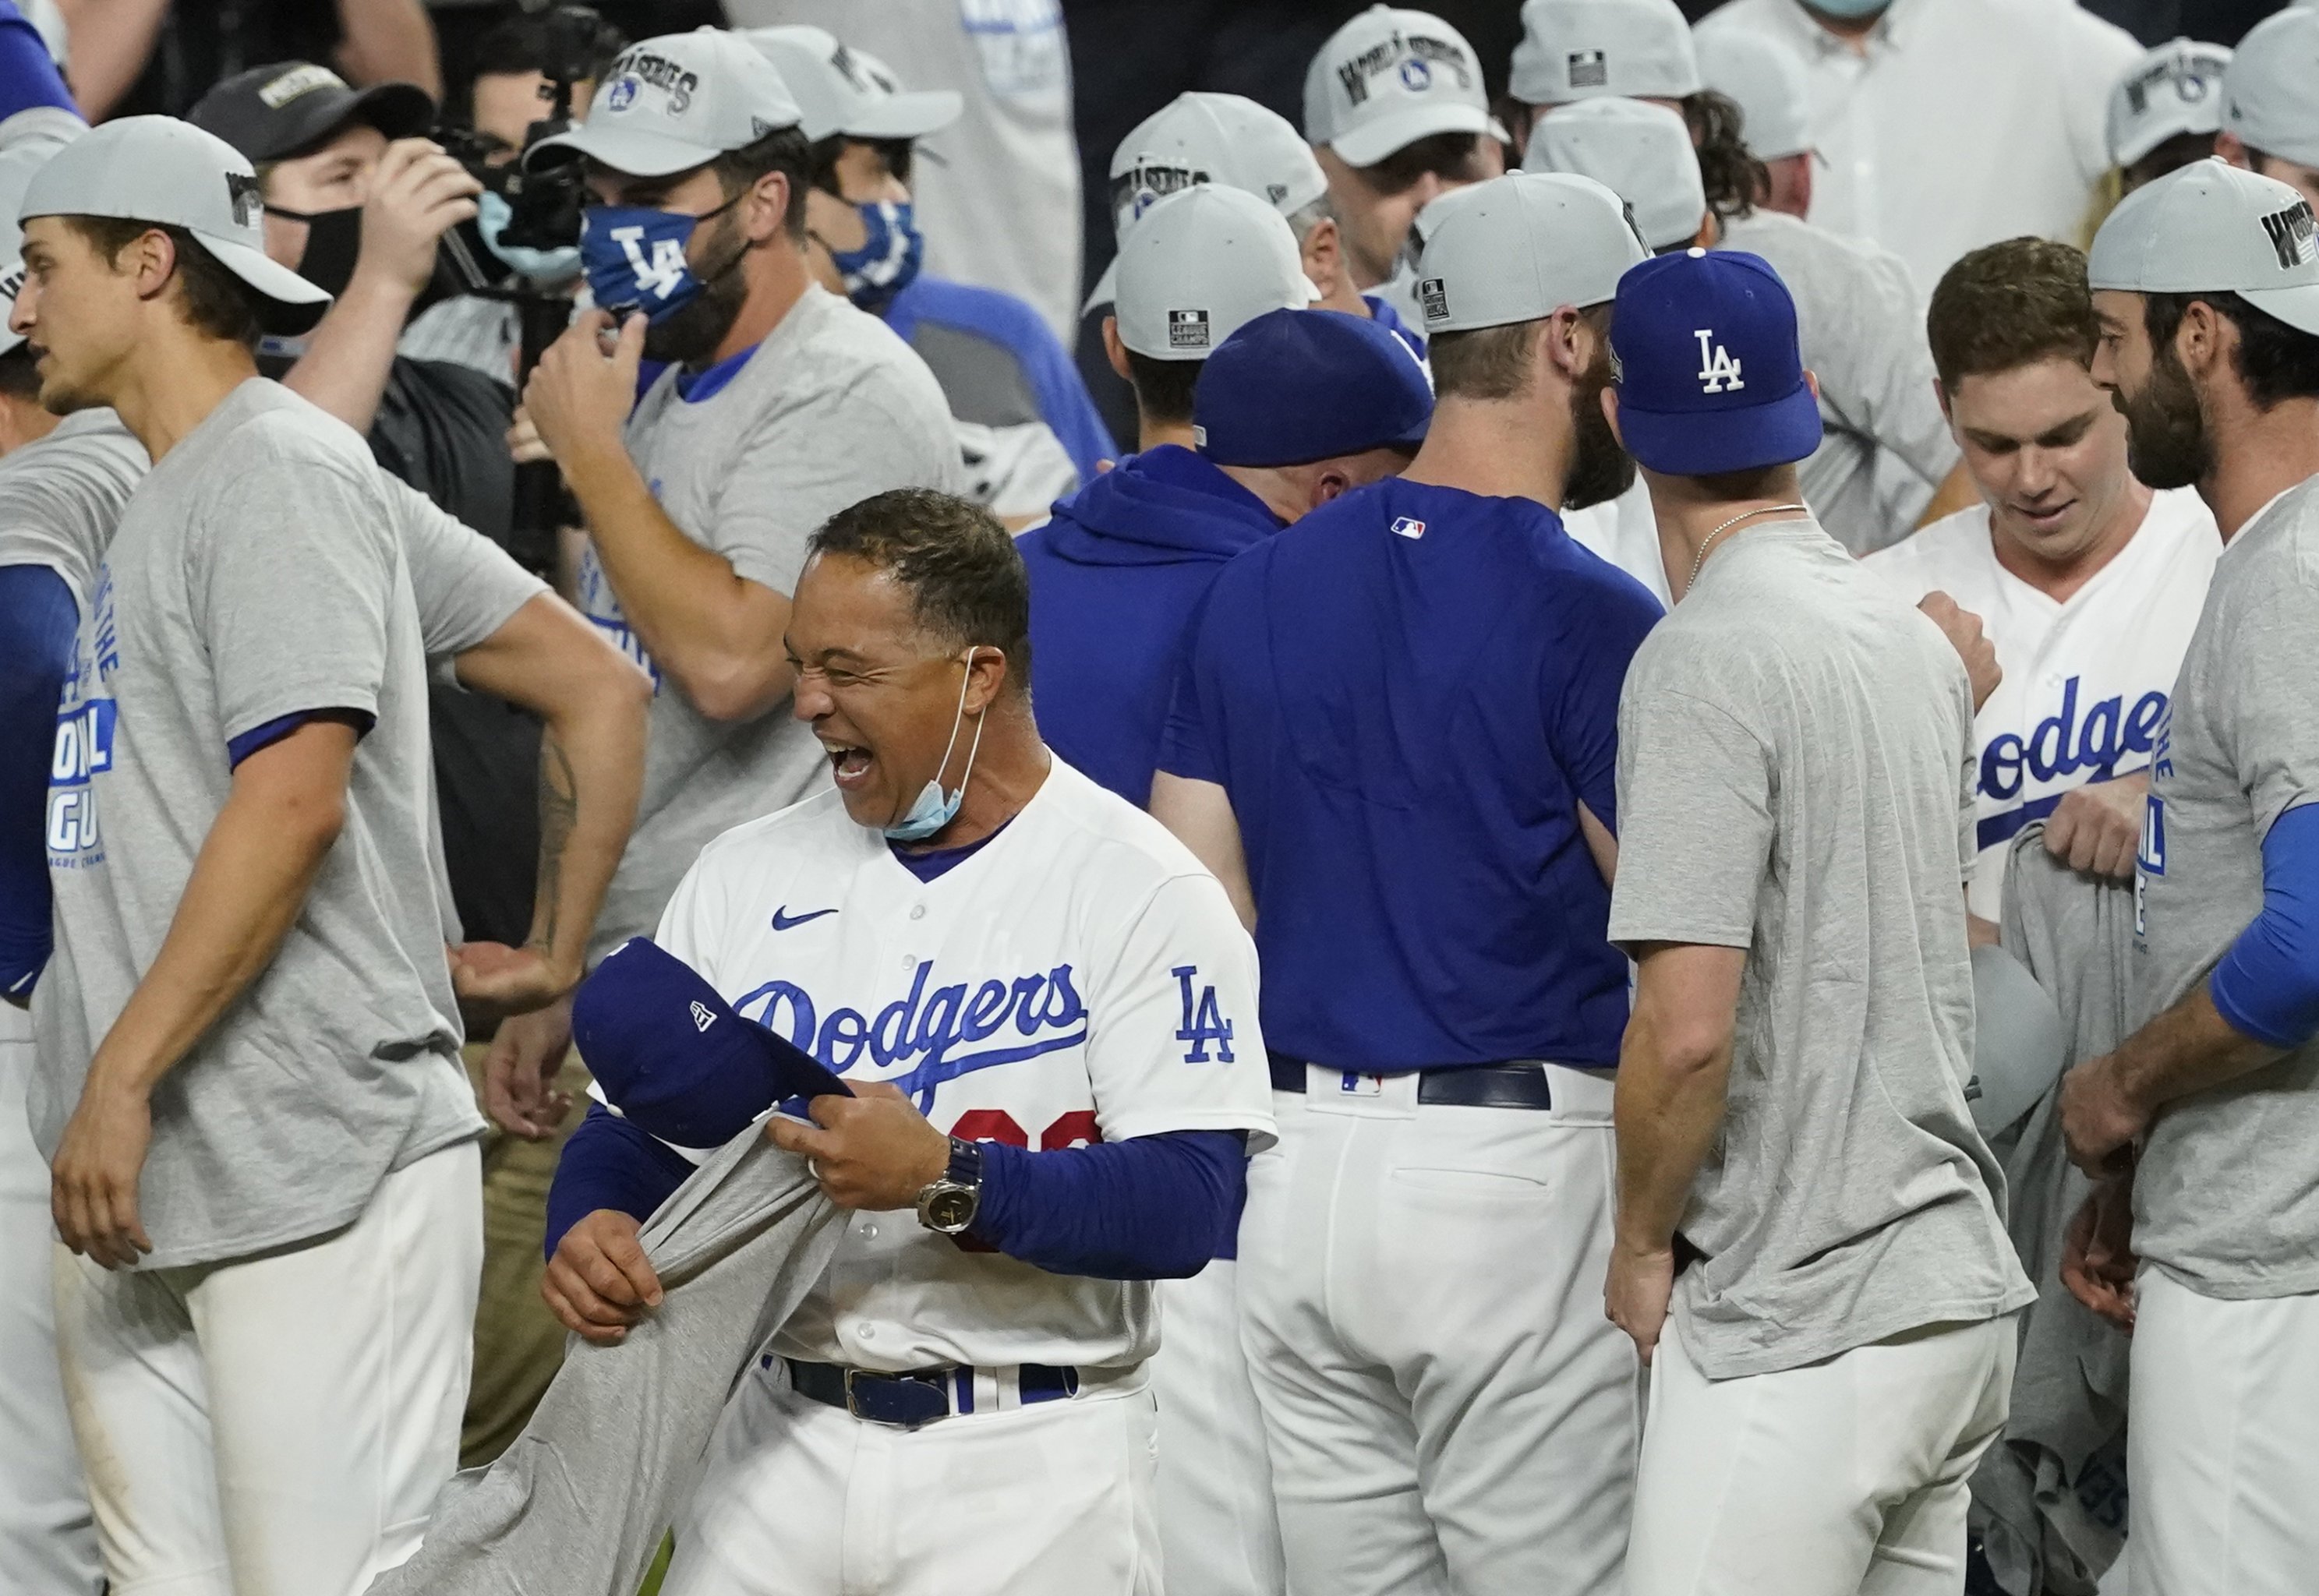 What you need to know about Friday's Rays-Dodgers World Series game